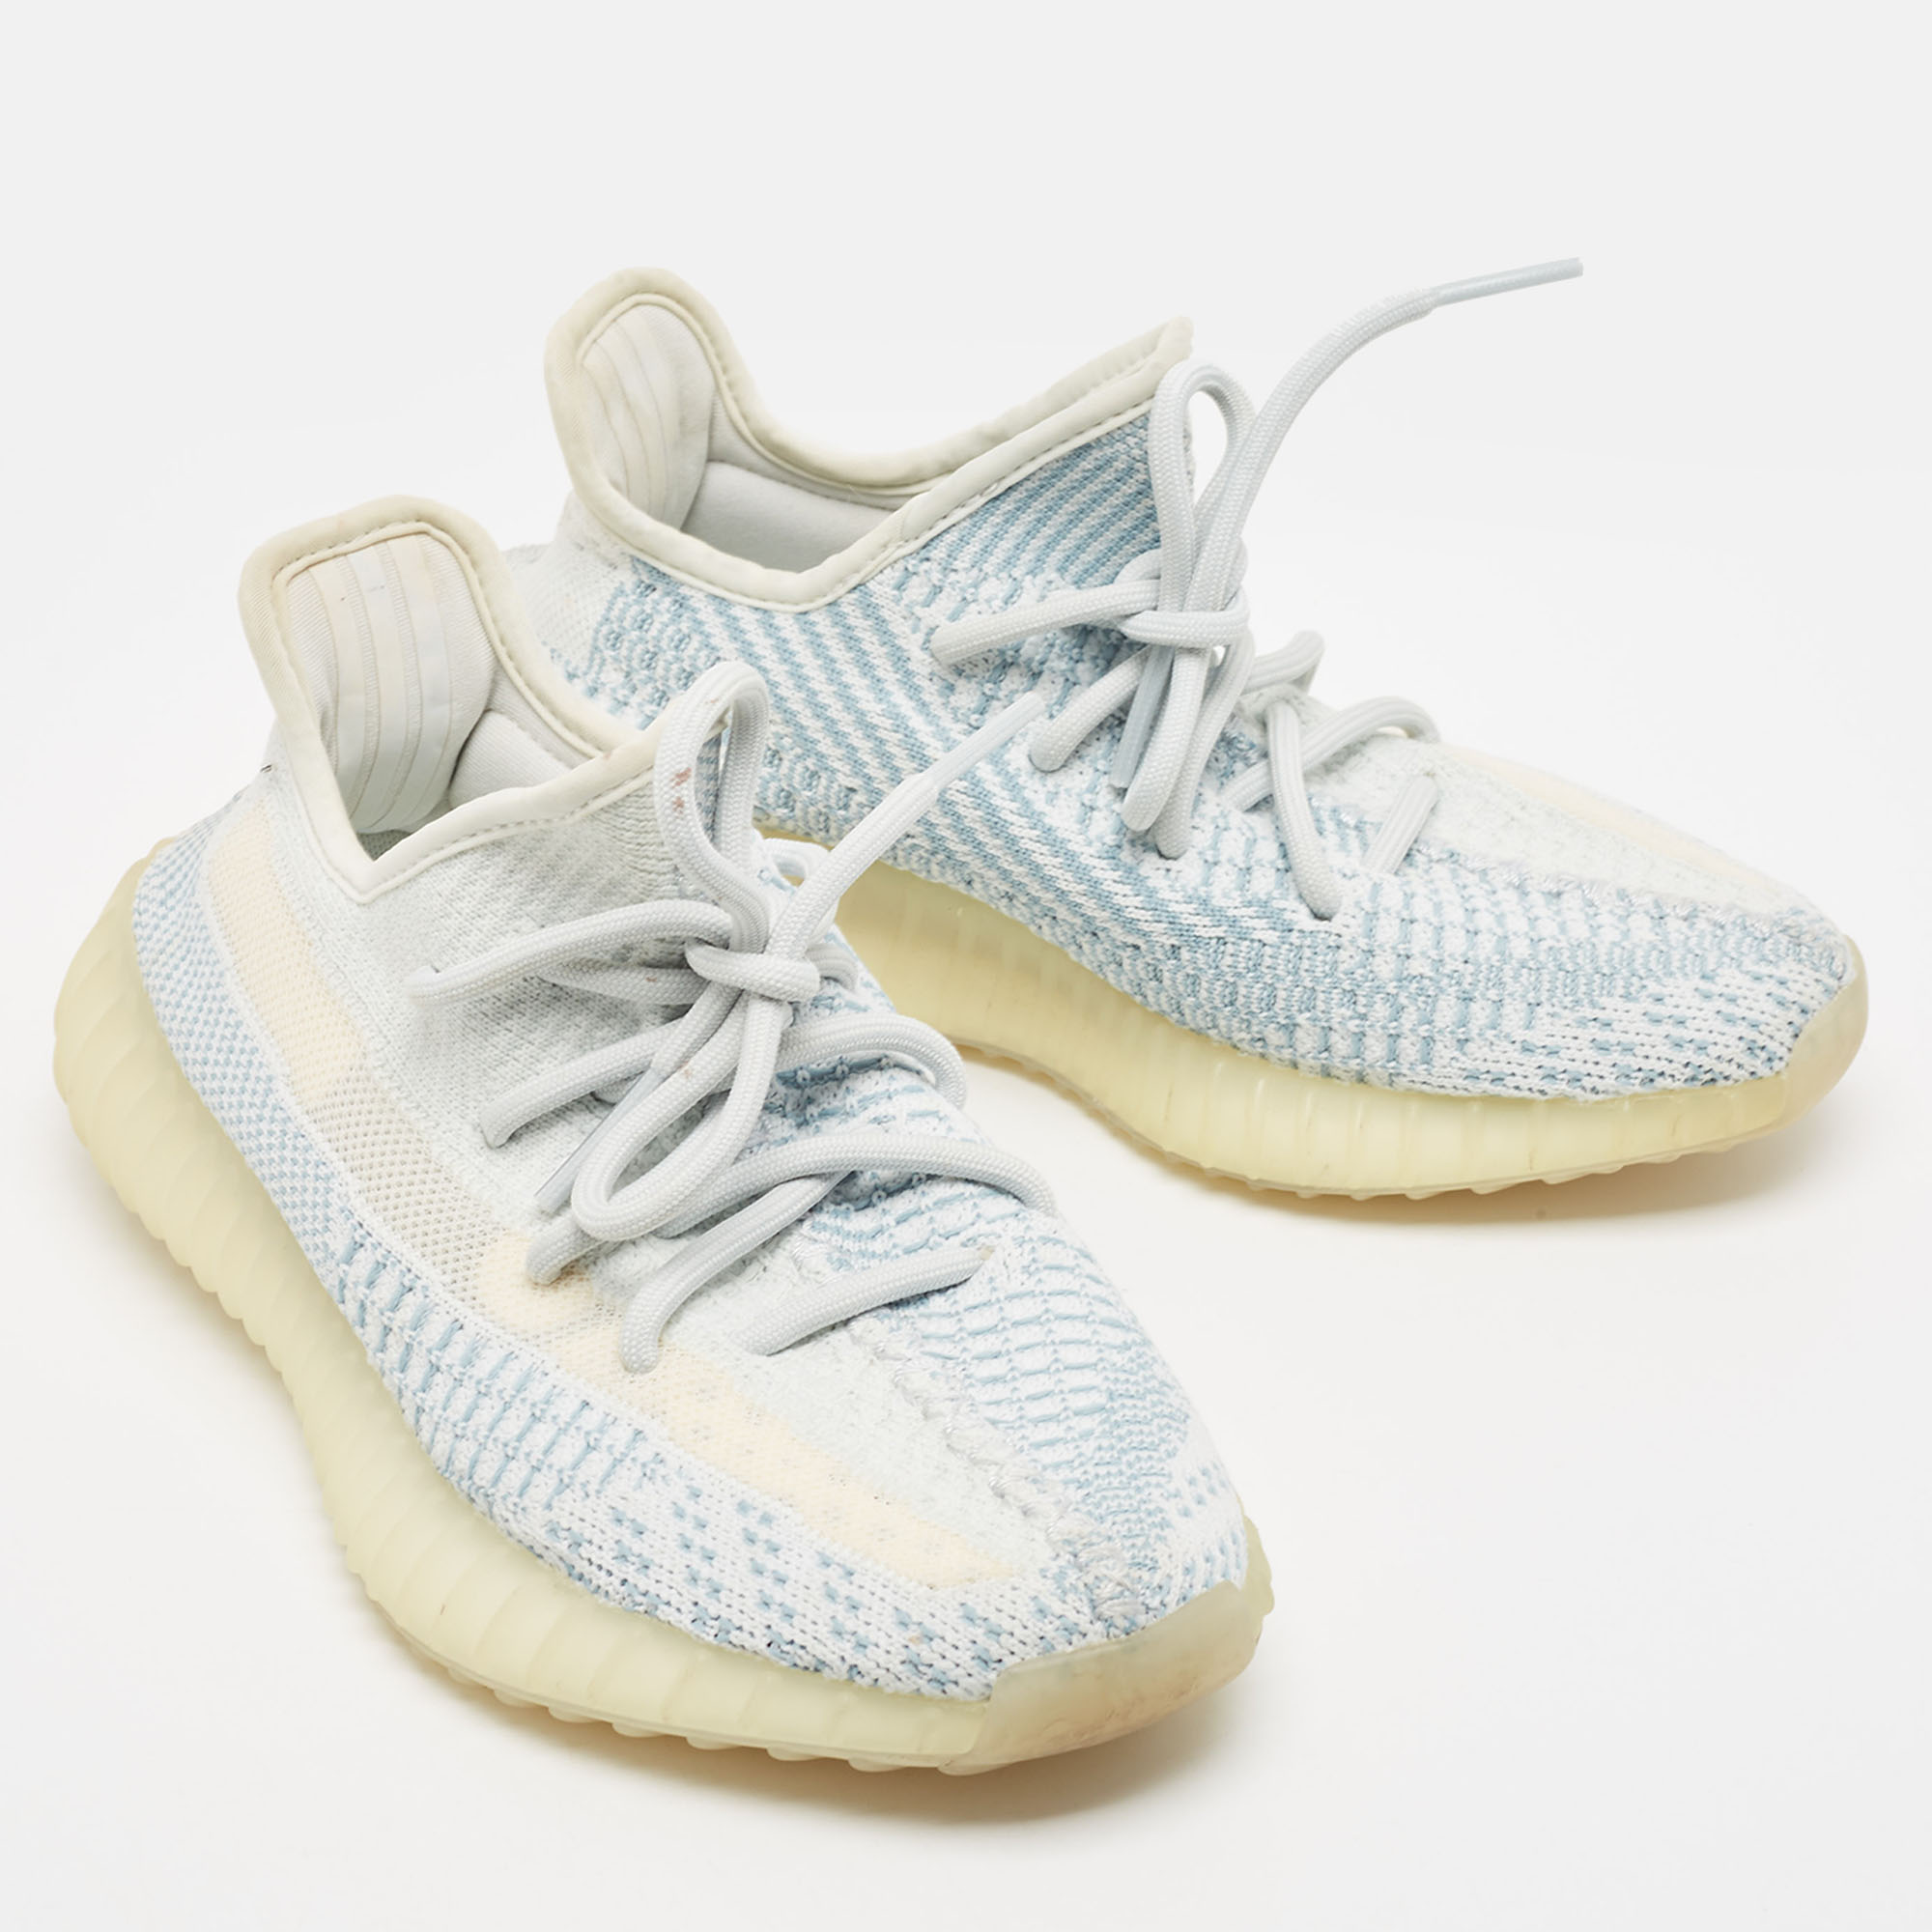 Yeezy X Adidas Blue/White Knit Fabric Boost 350 V2 Cloud-White Sneakers Size 36